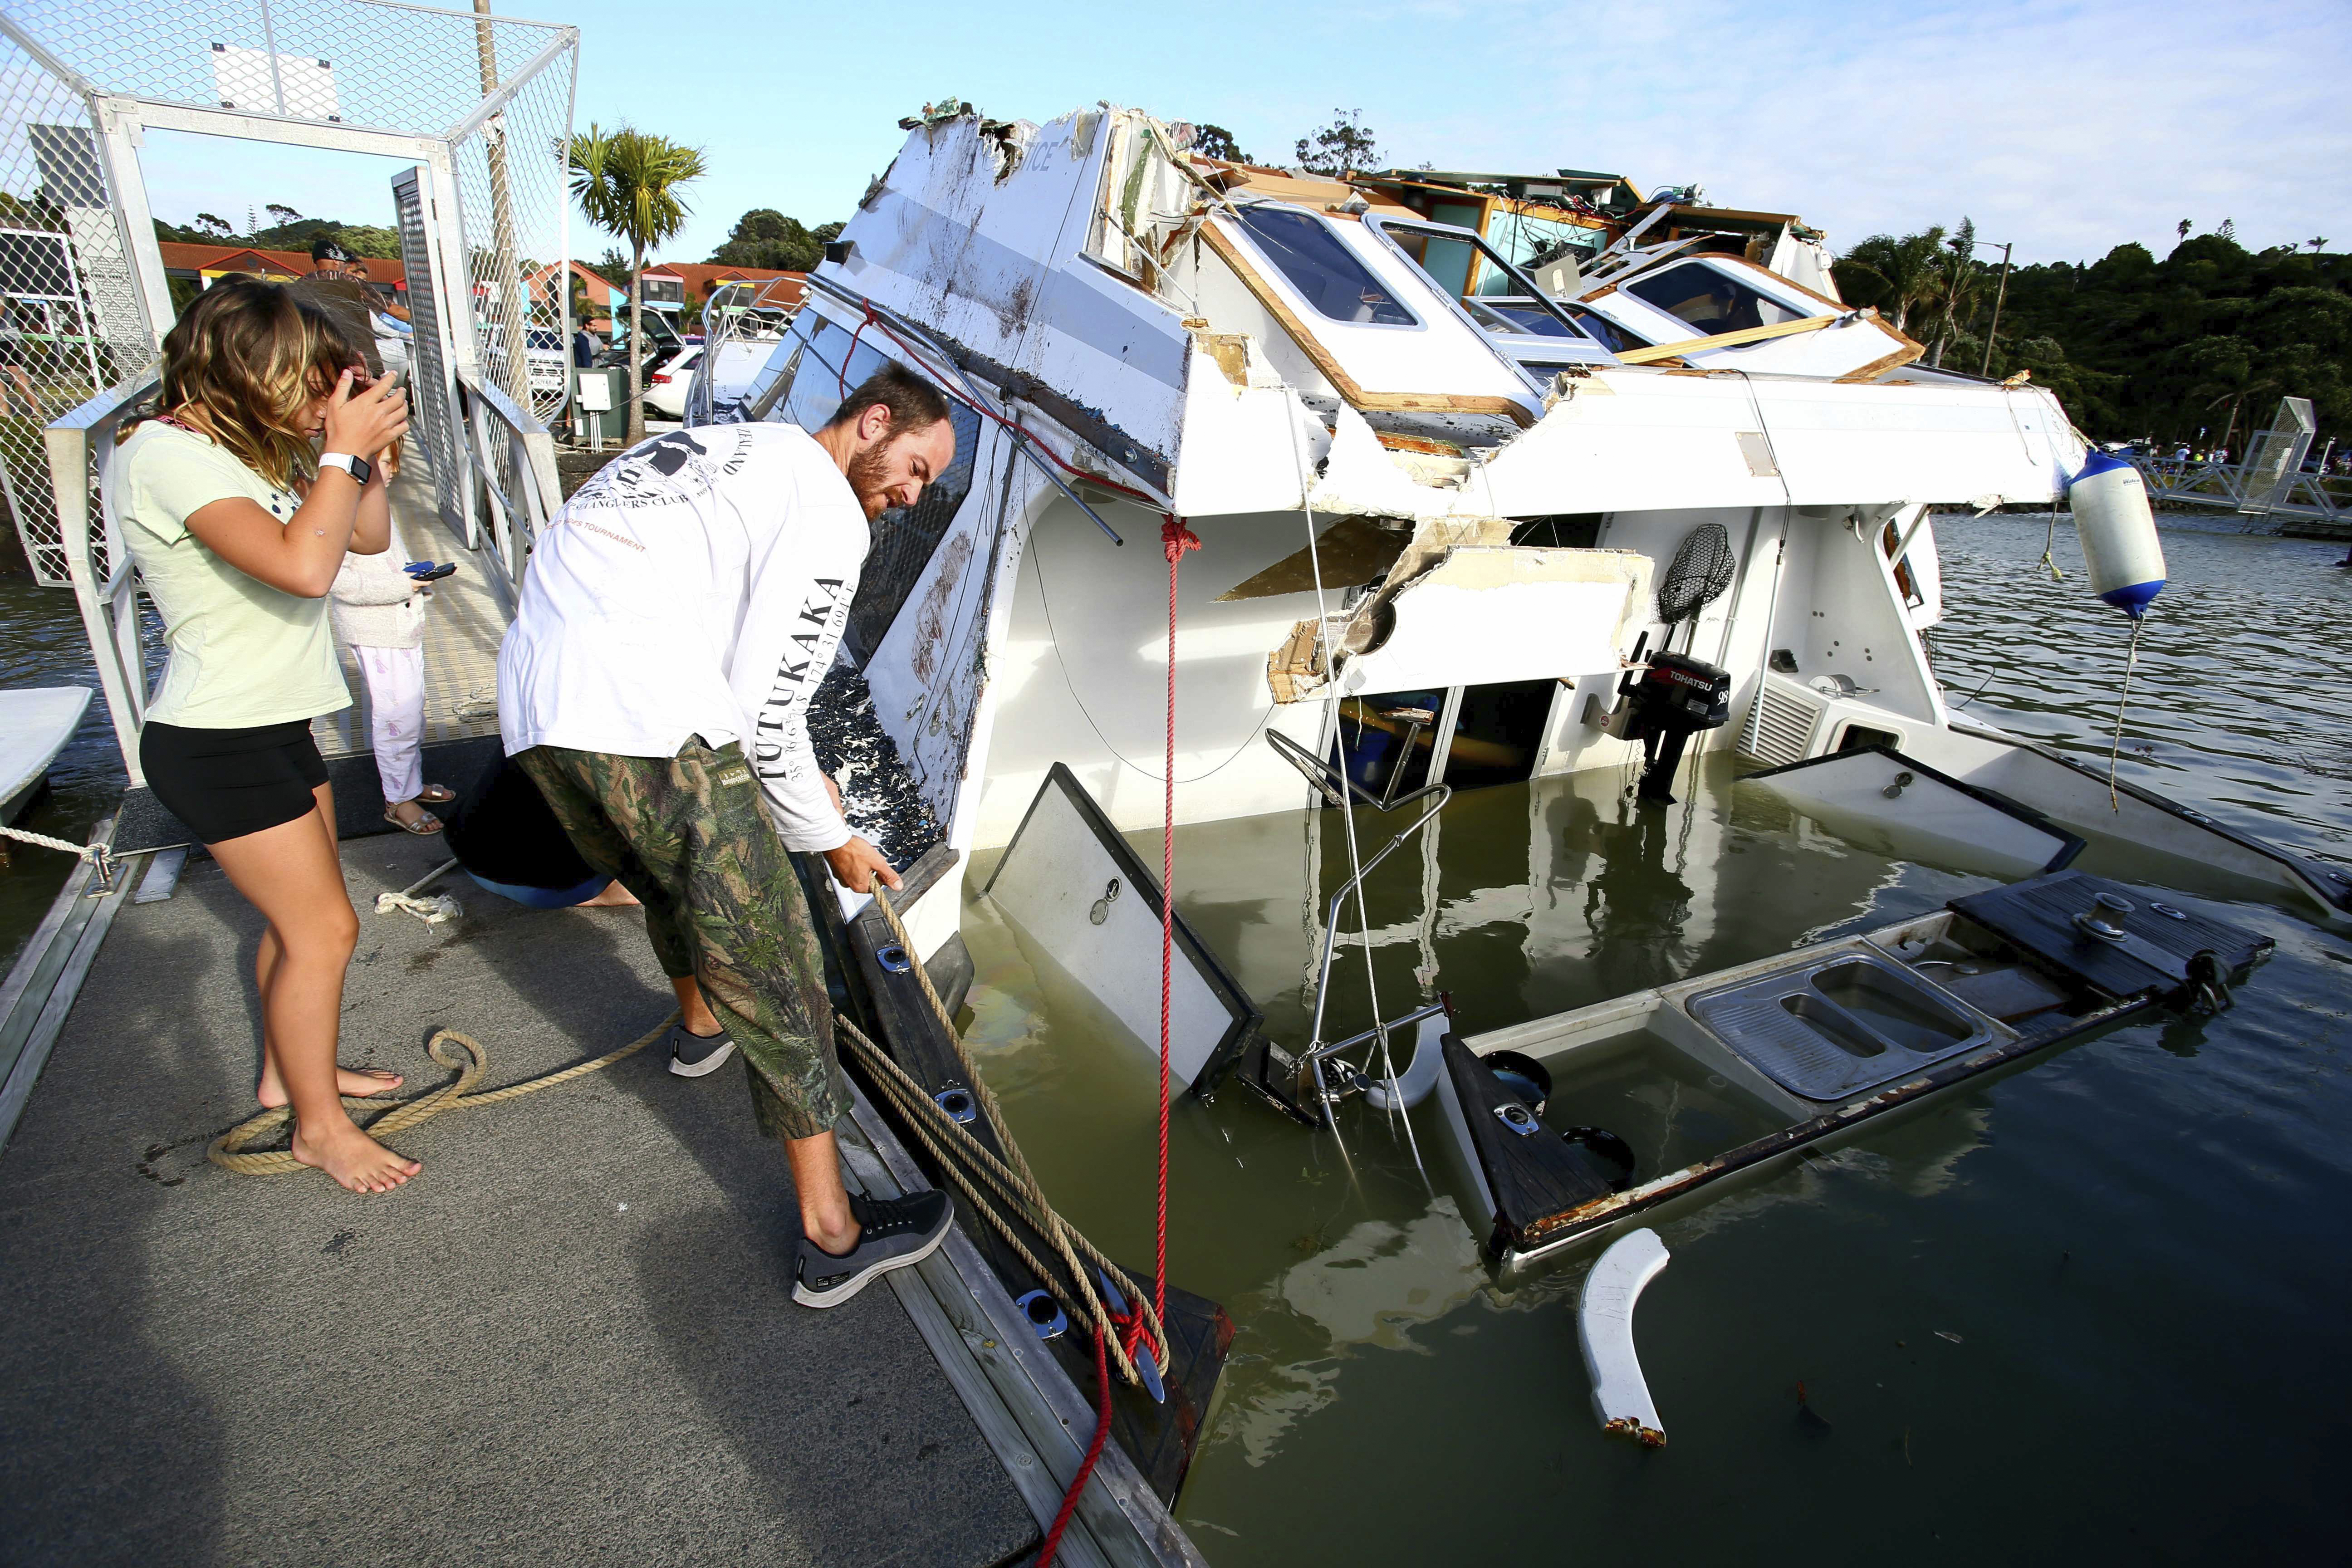 A couple look at a damaged boat in a marina at Tutukaka, New Zealand after waves from a volcano eruption swept into the marina